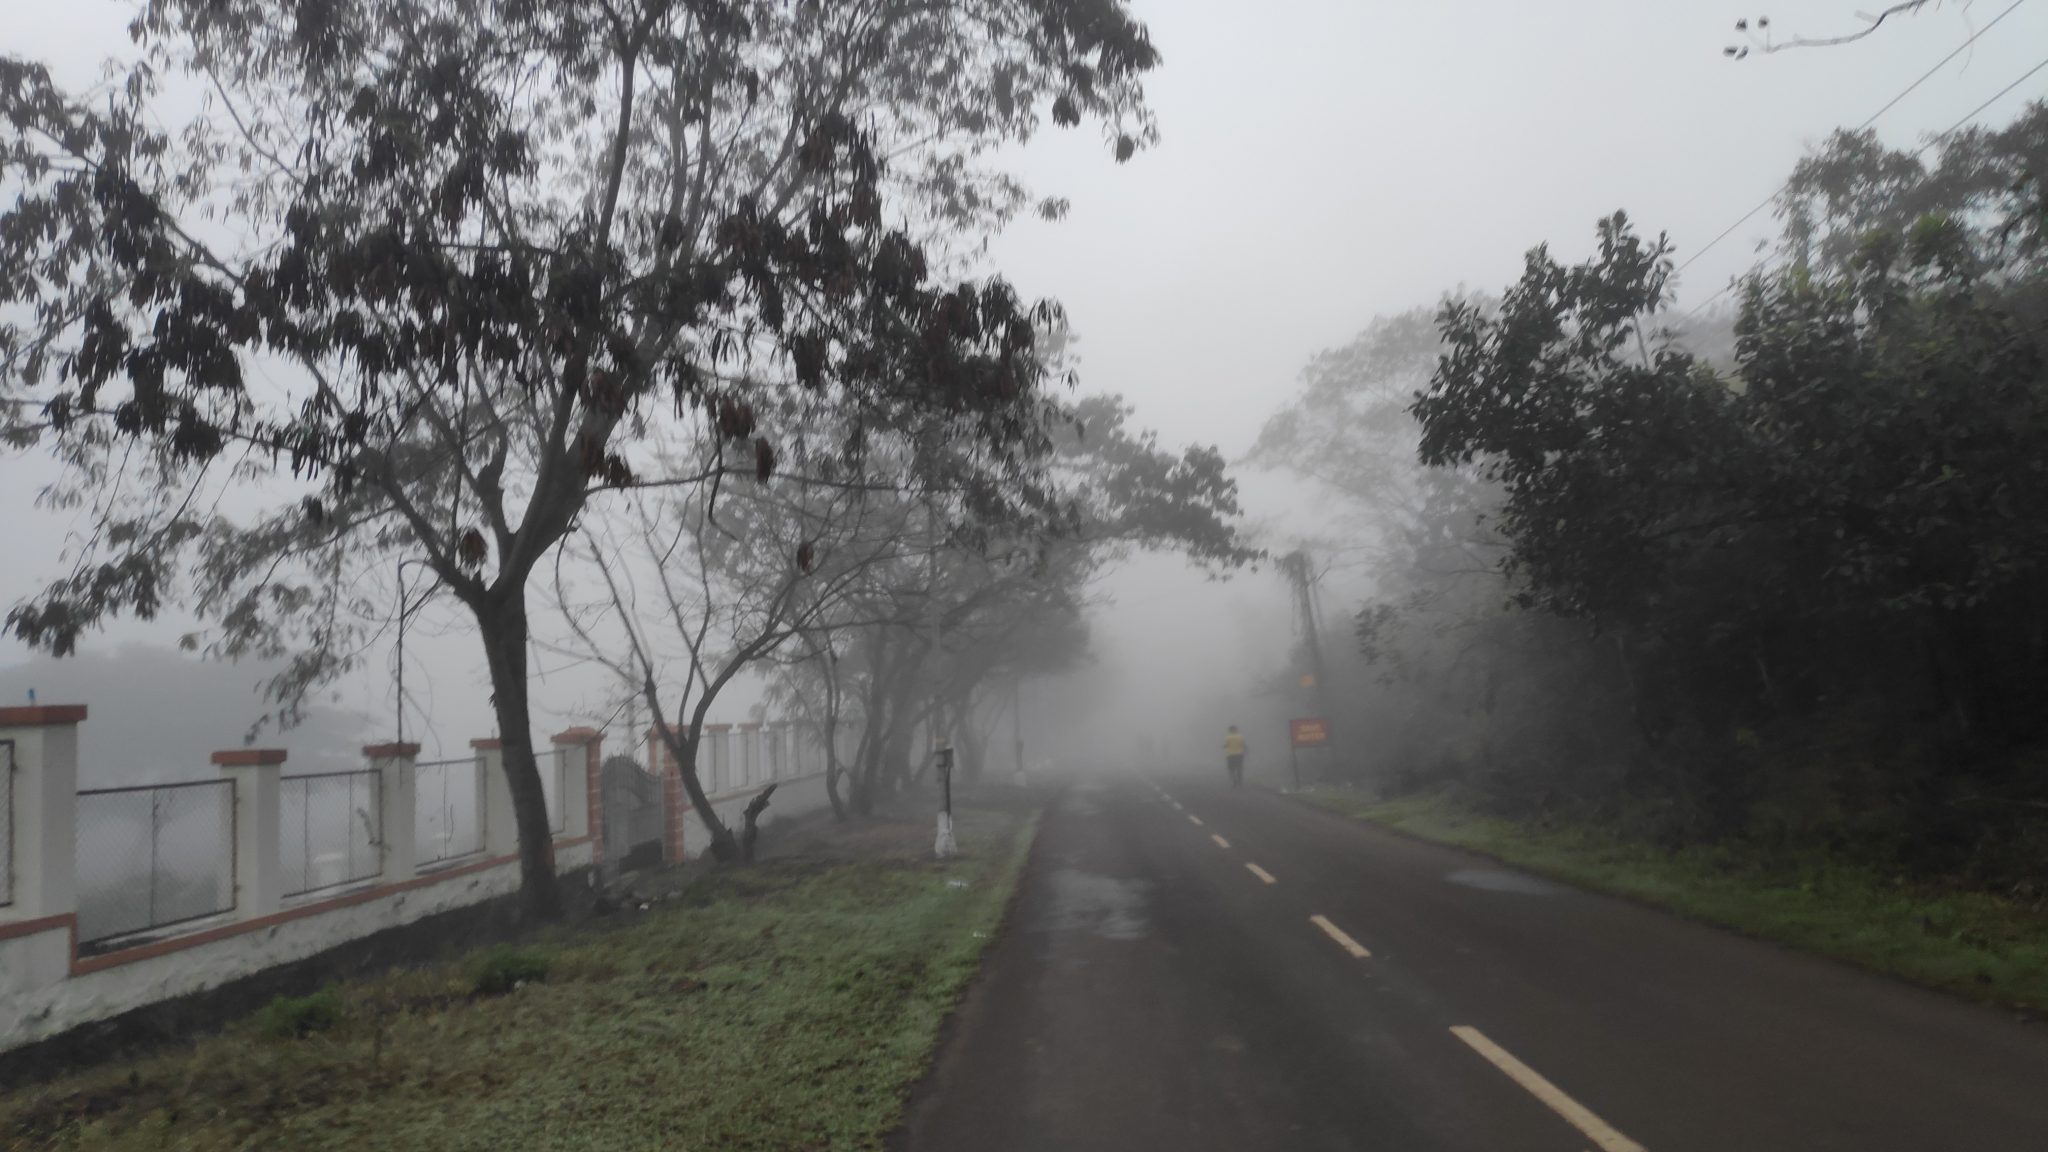 Morning fog, road and trees